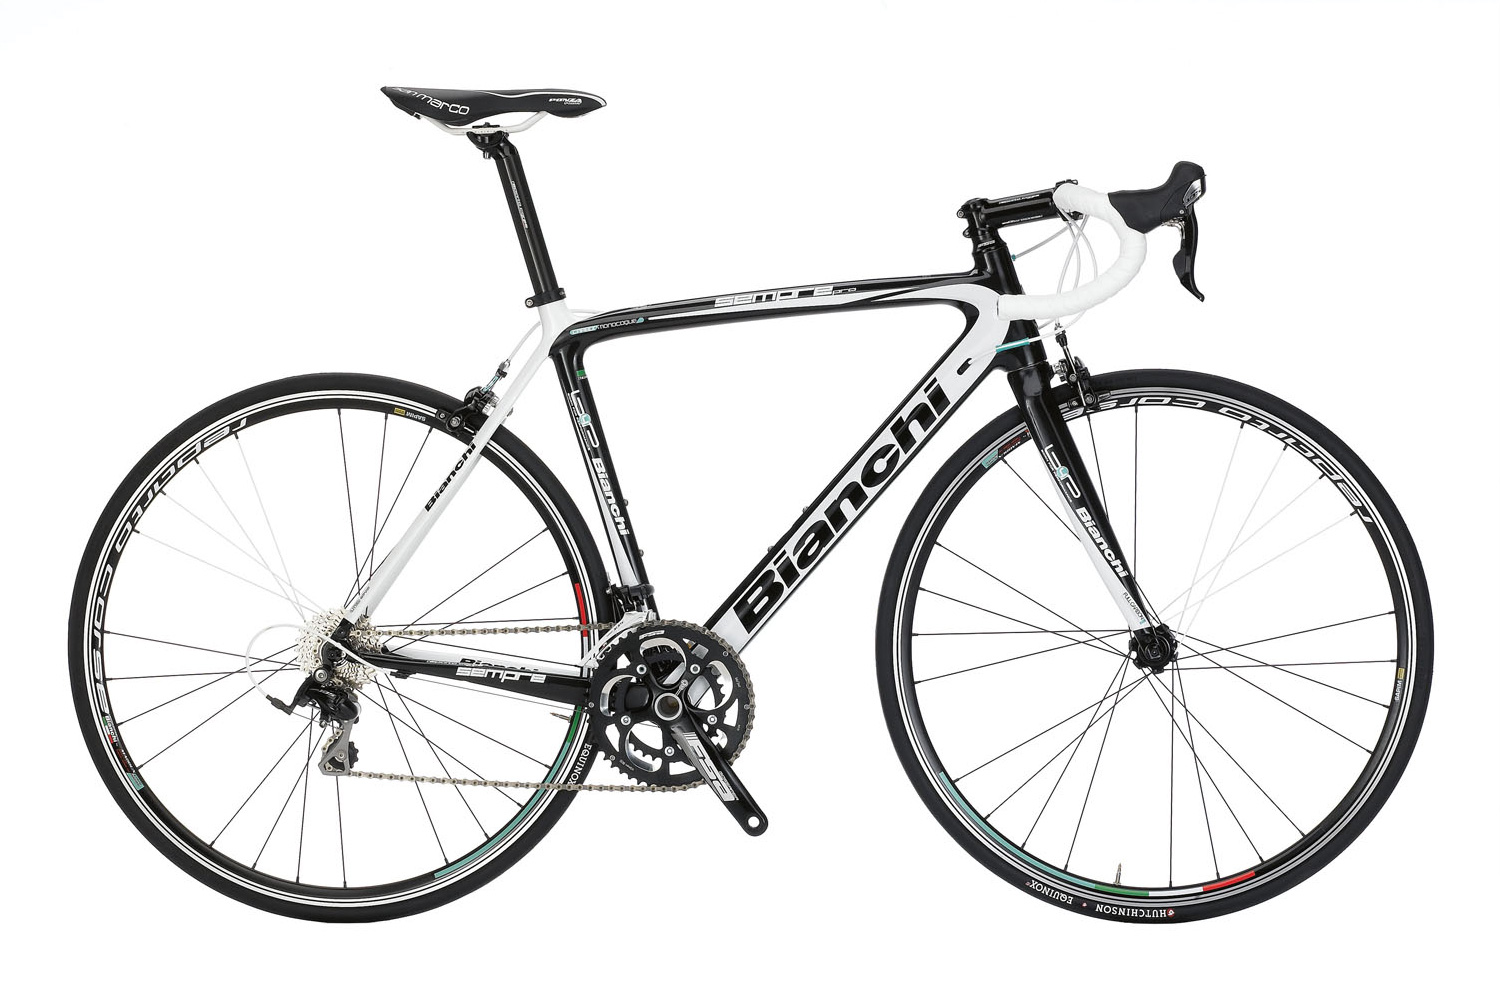 2013 Sempre Pro 105 First Look